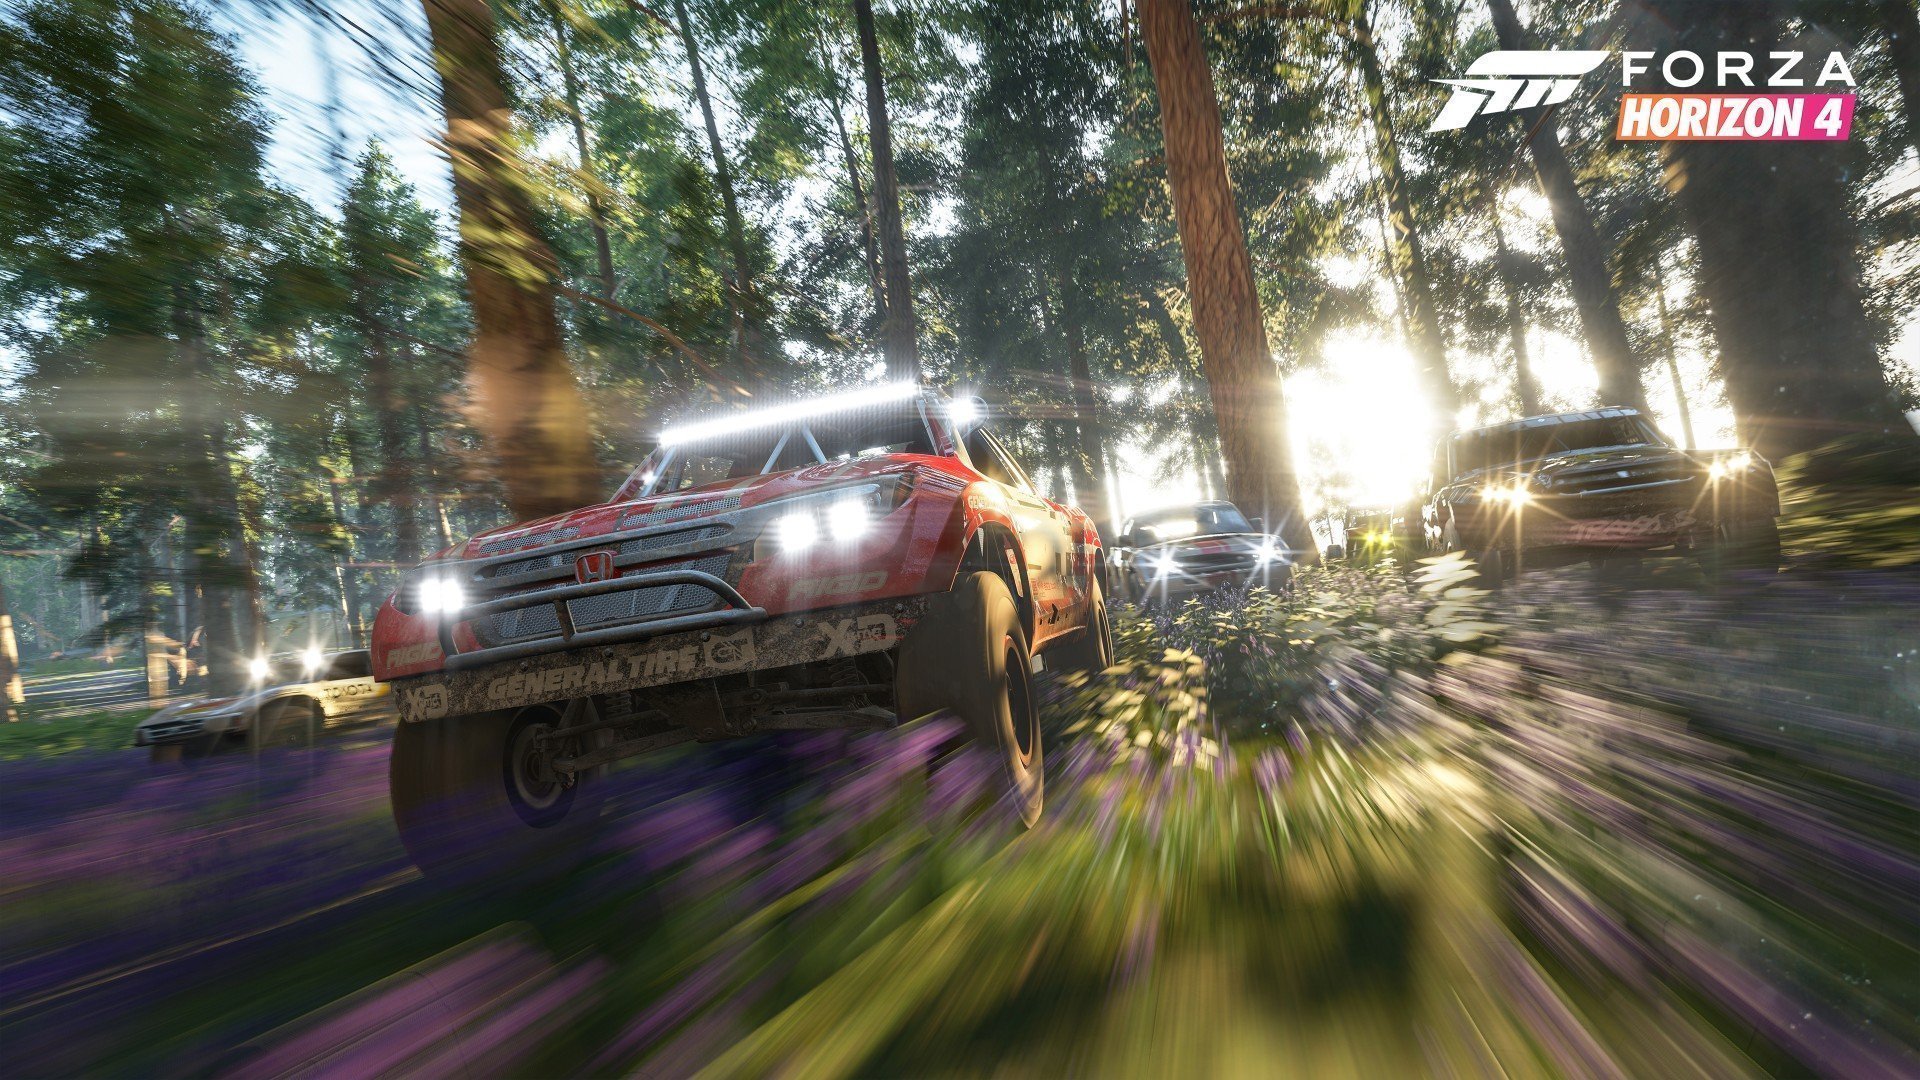 The ability to play online in Forza Horizon 4, bought at the Winds store Forza-Horizon-4_Forest-Trucks-1.jpg